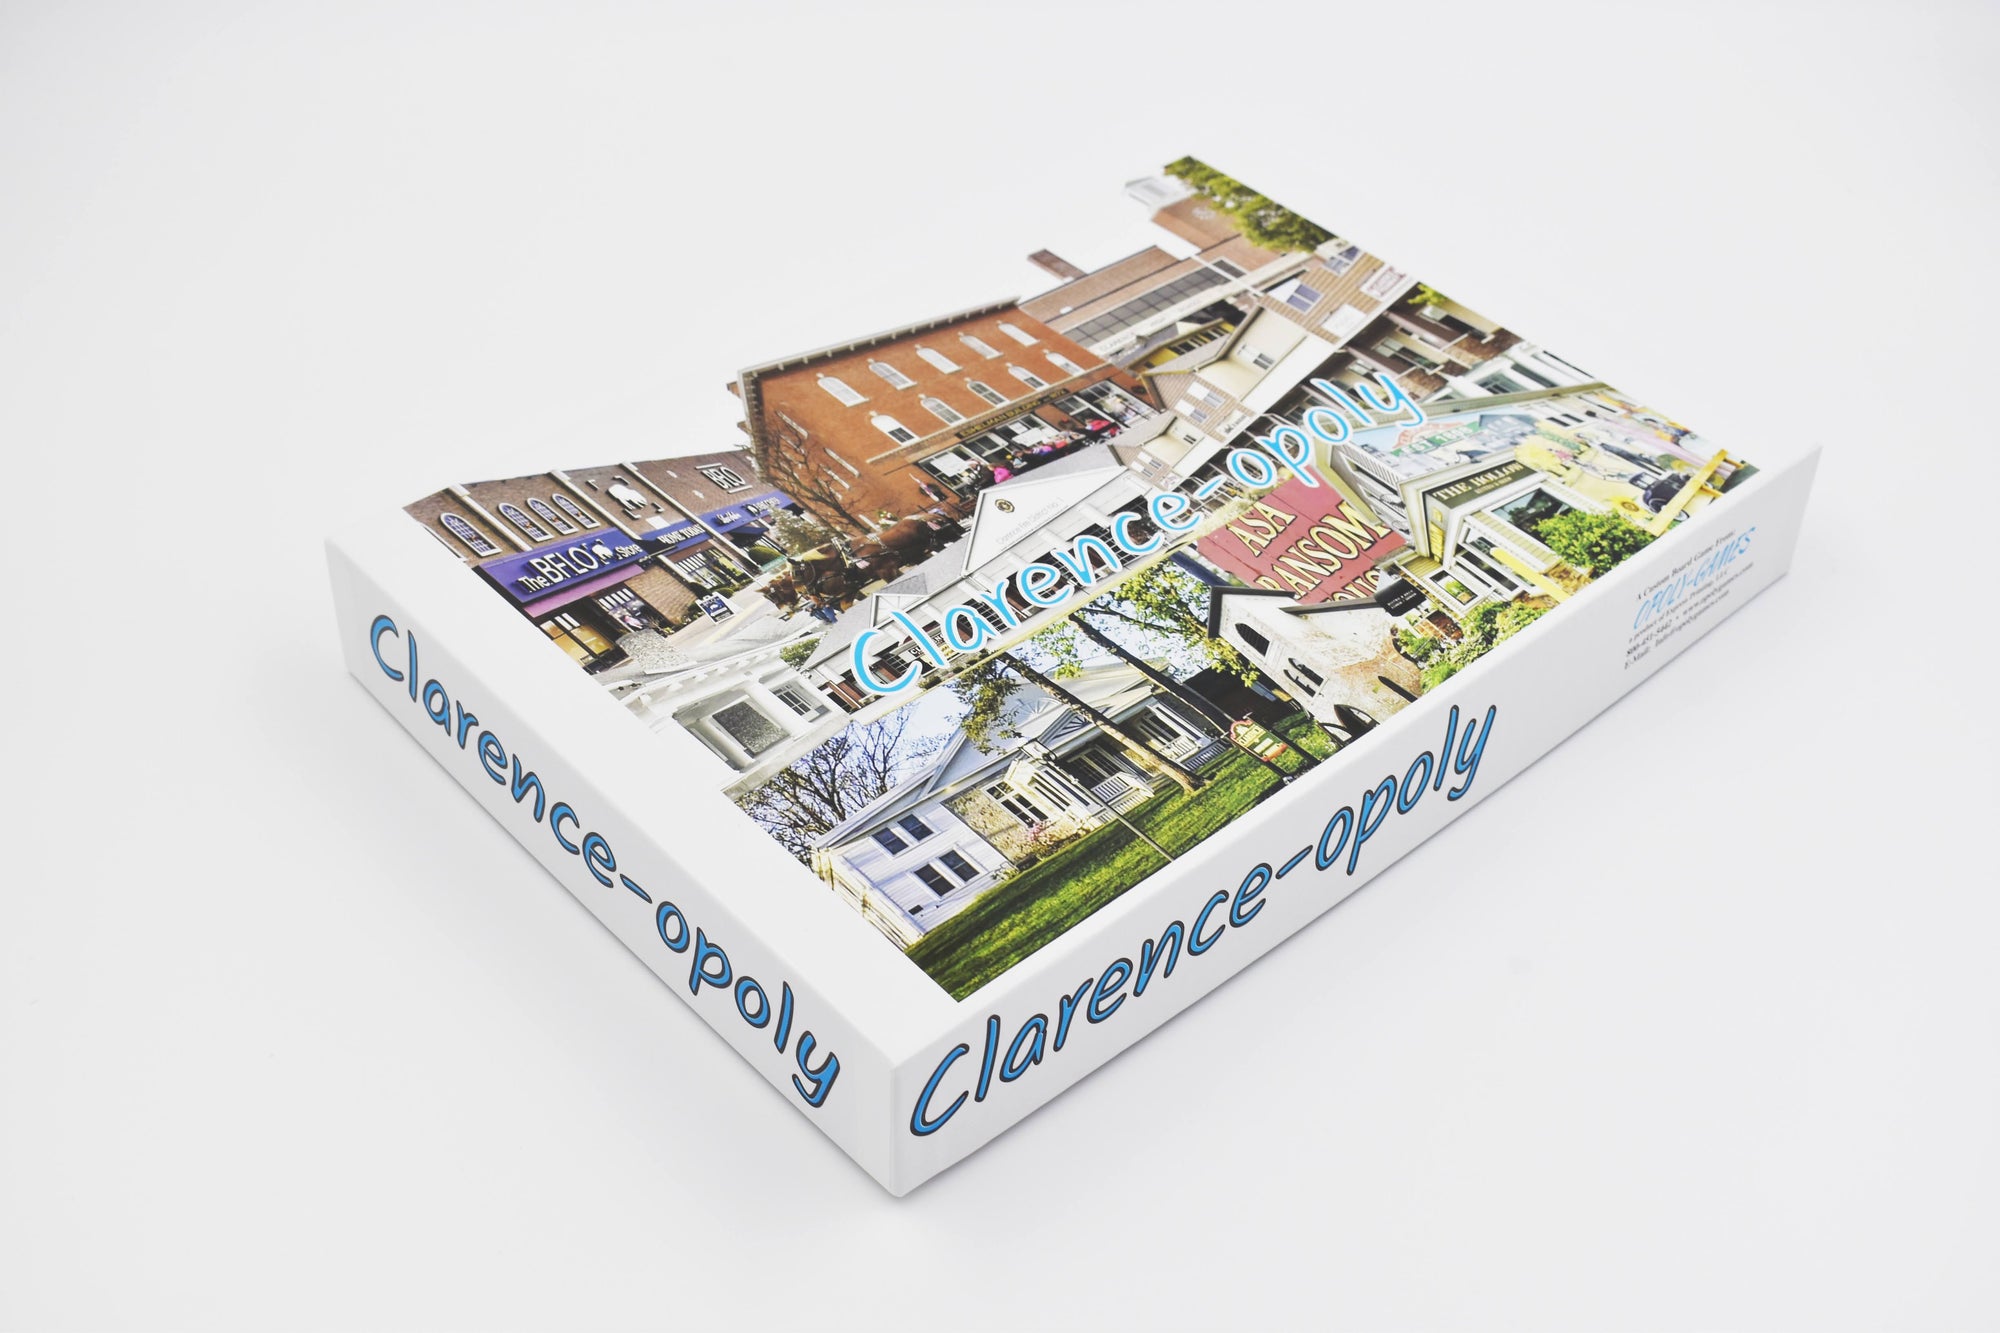 Clarence-opoly Board Game